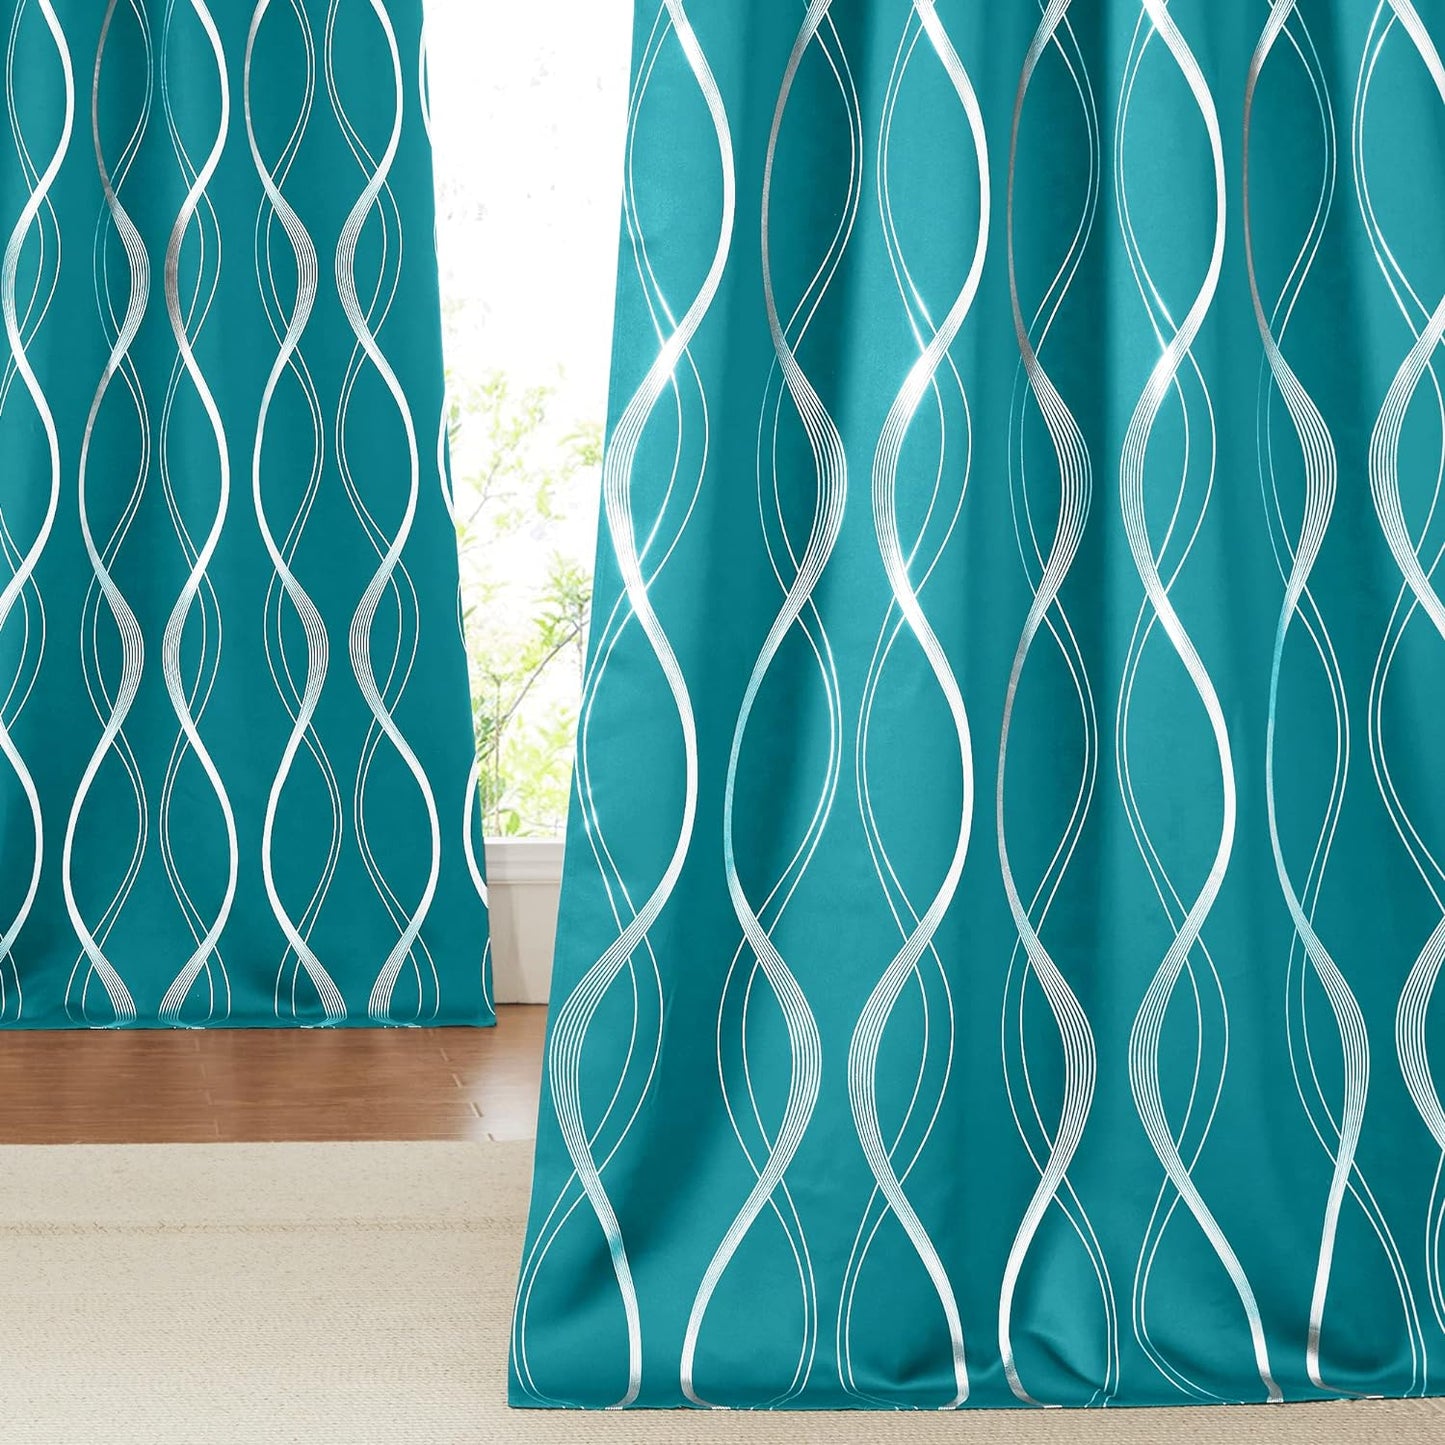 NICETOWN Grey Blackout Curtains 84 Inch Length 2 Panels Set for Bedroom/Living Room, Noise Reducing Thermal Insulated Wave Line Foil Print Drapes for Patio Sliding Glass Door (52 X 84, Gray)  NICETOWN Peacock Teal 52"W X 84"L 